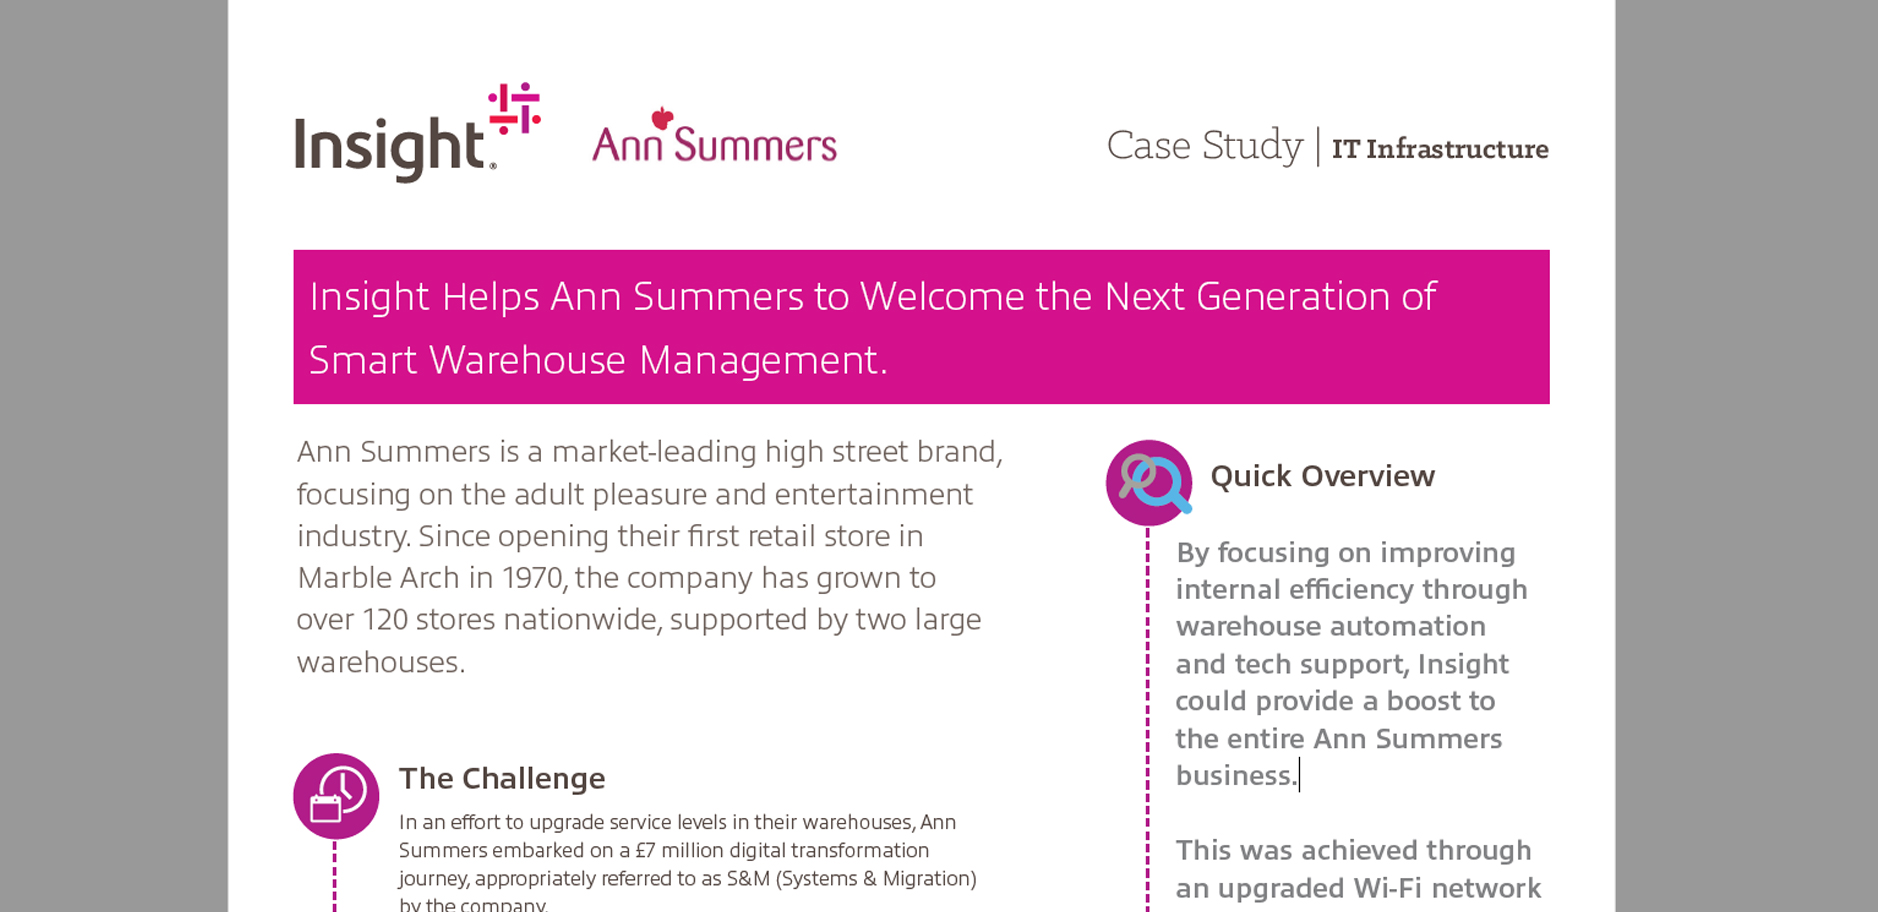 Learn how Insight helped Ann Summers with their digital transformation journey